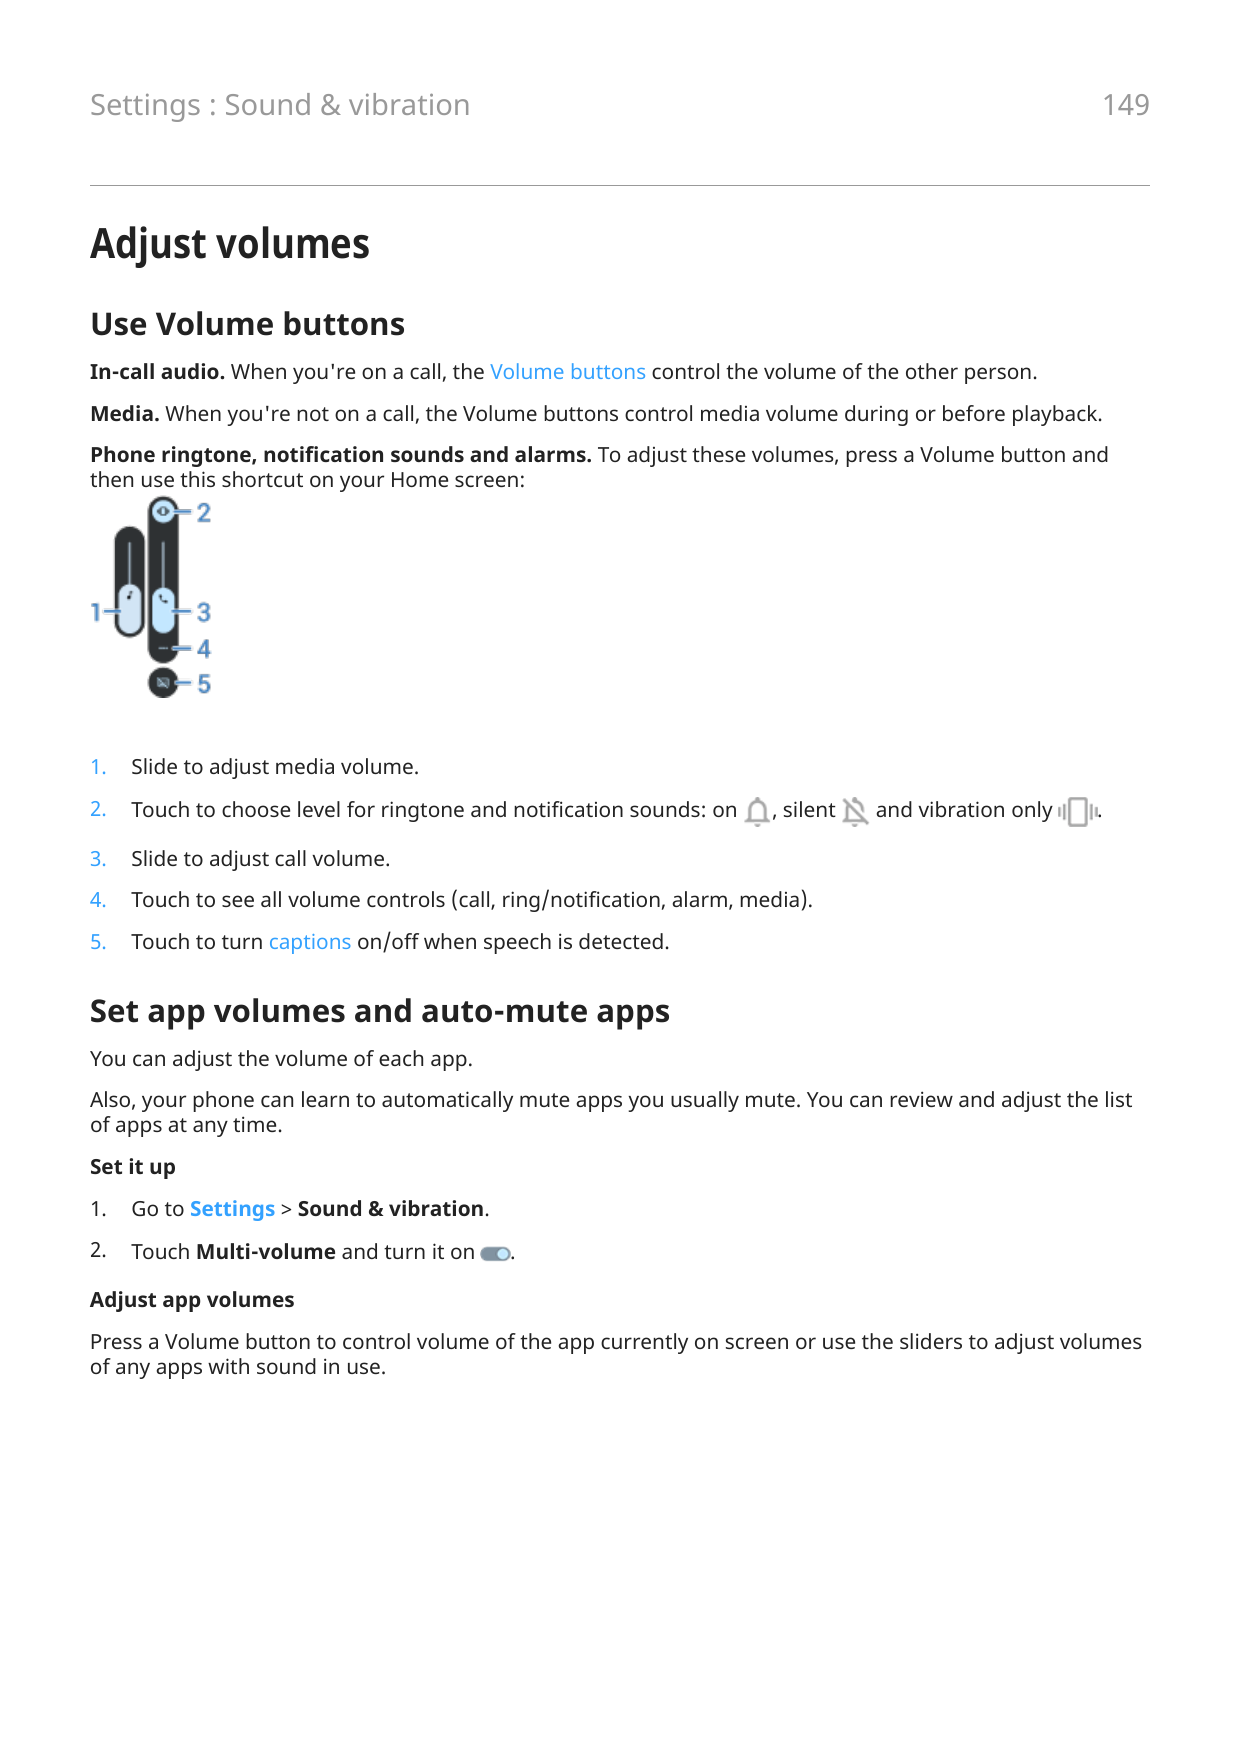 149Settings : Sound & vibrationAdjust volumesUse Volume buttonsIn-call audio. When you're on a call, the Volume buttons control 